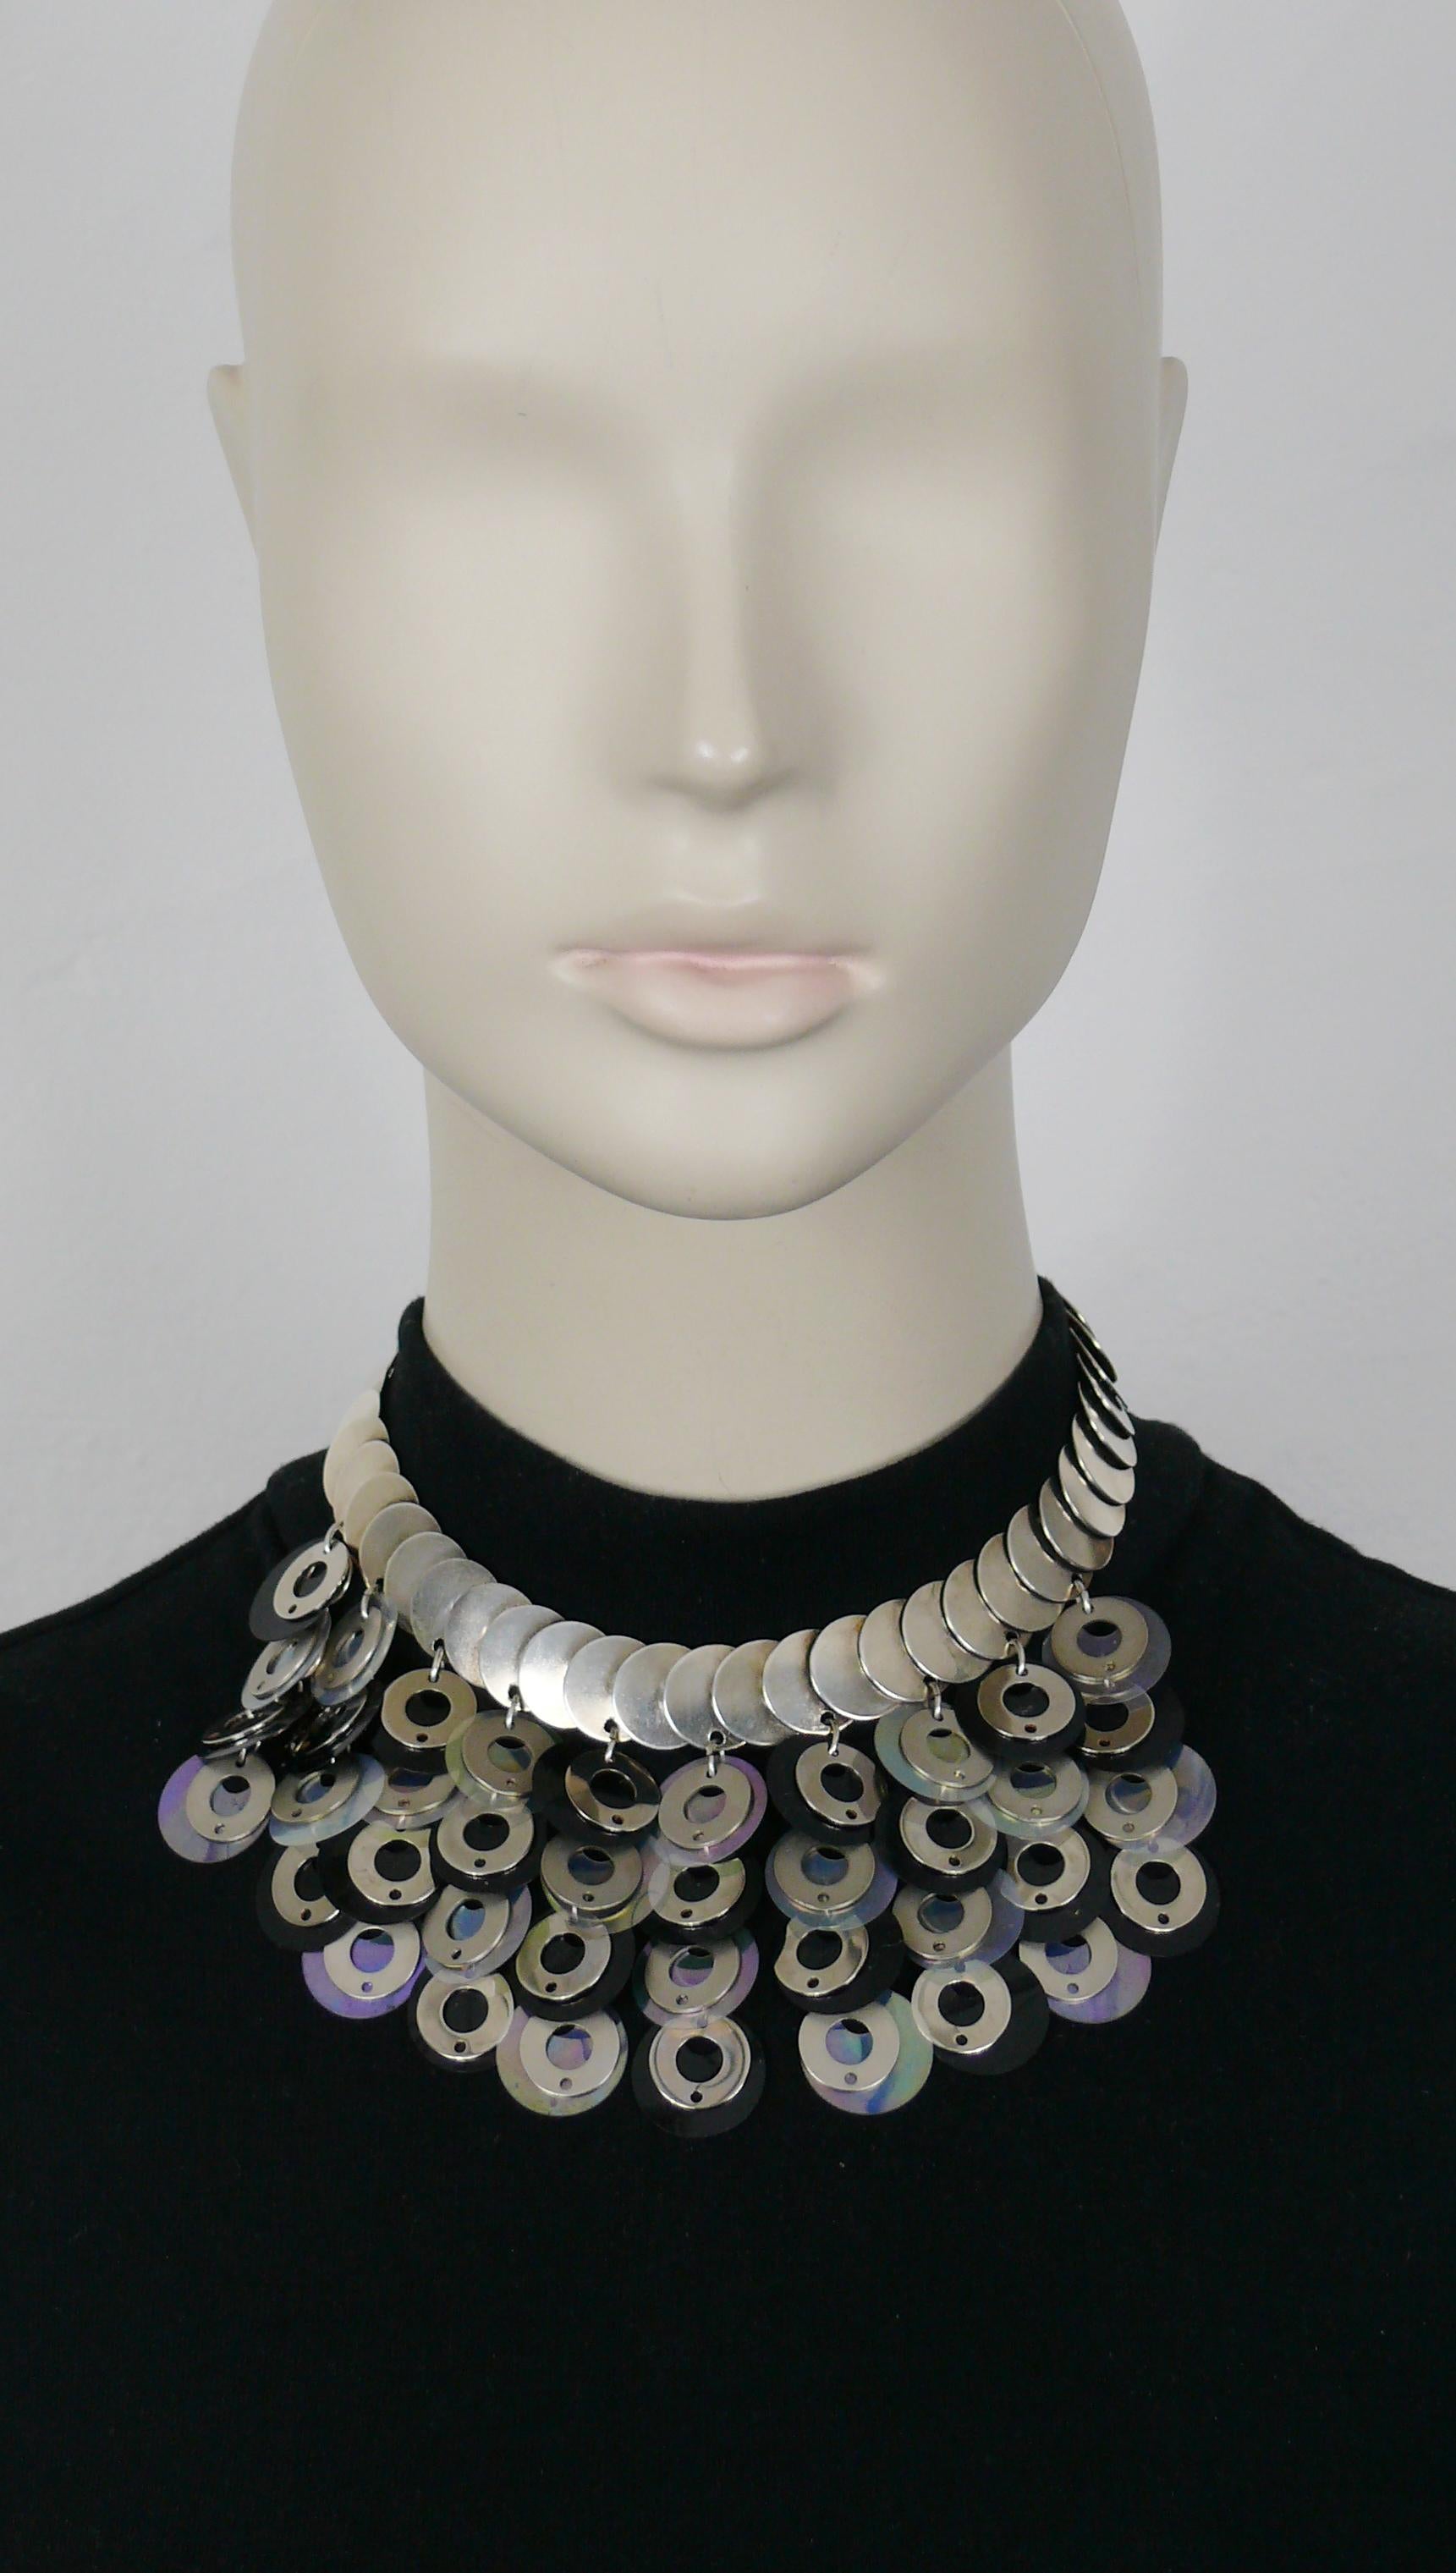 PACO RABANNE vintage necklace featuring articulated silver tone metal discs embellished with black and clear rhodhoid disc cascade.

Lobster clasp closure.
Extension chain.

Marked PACO RABANNE Paris.

Indicative measurements : length from approx.